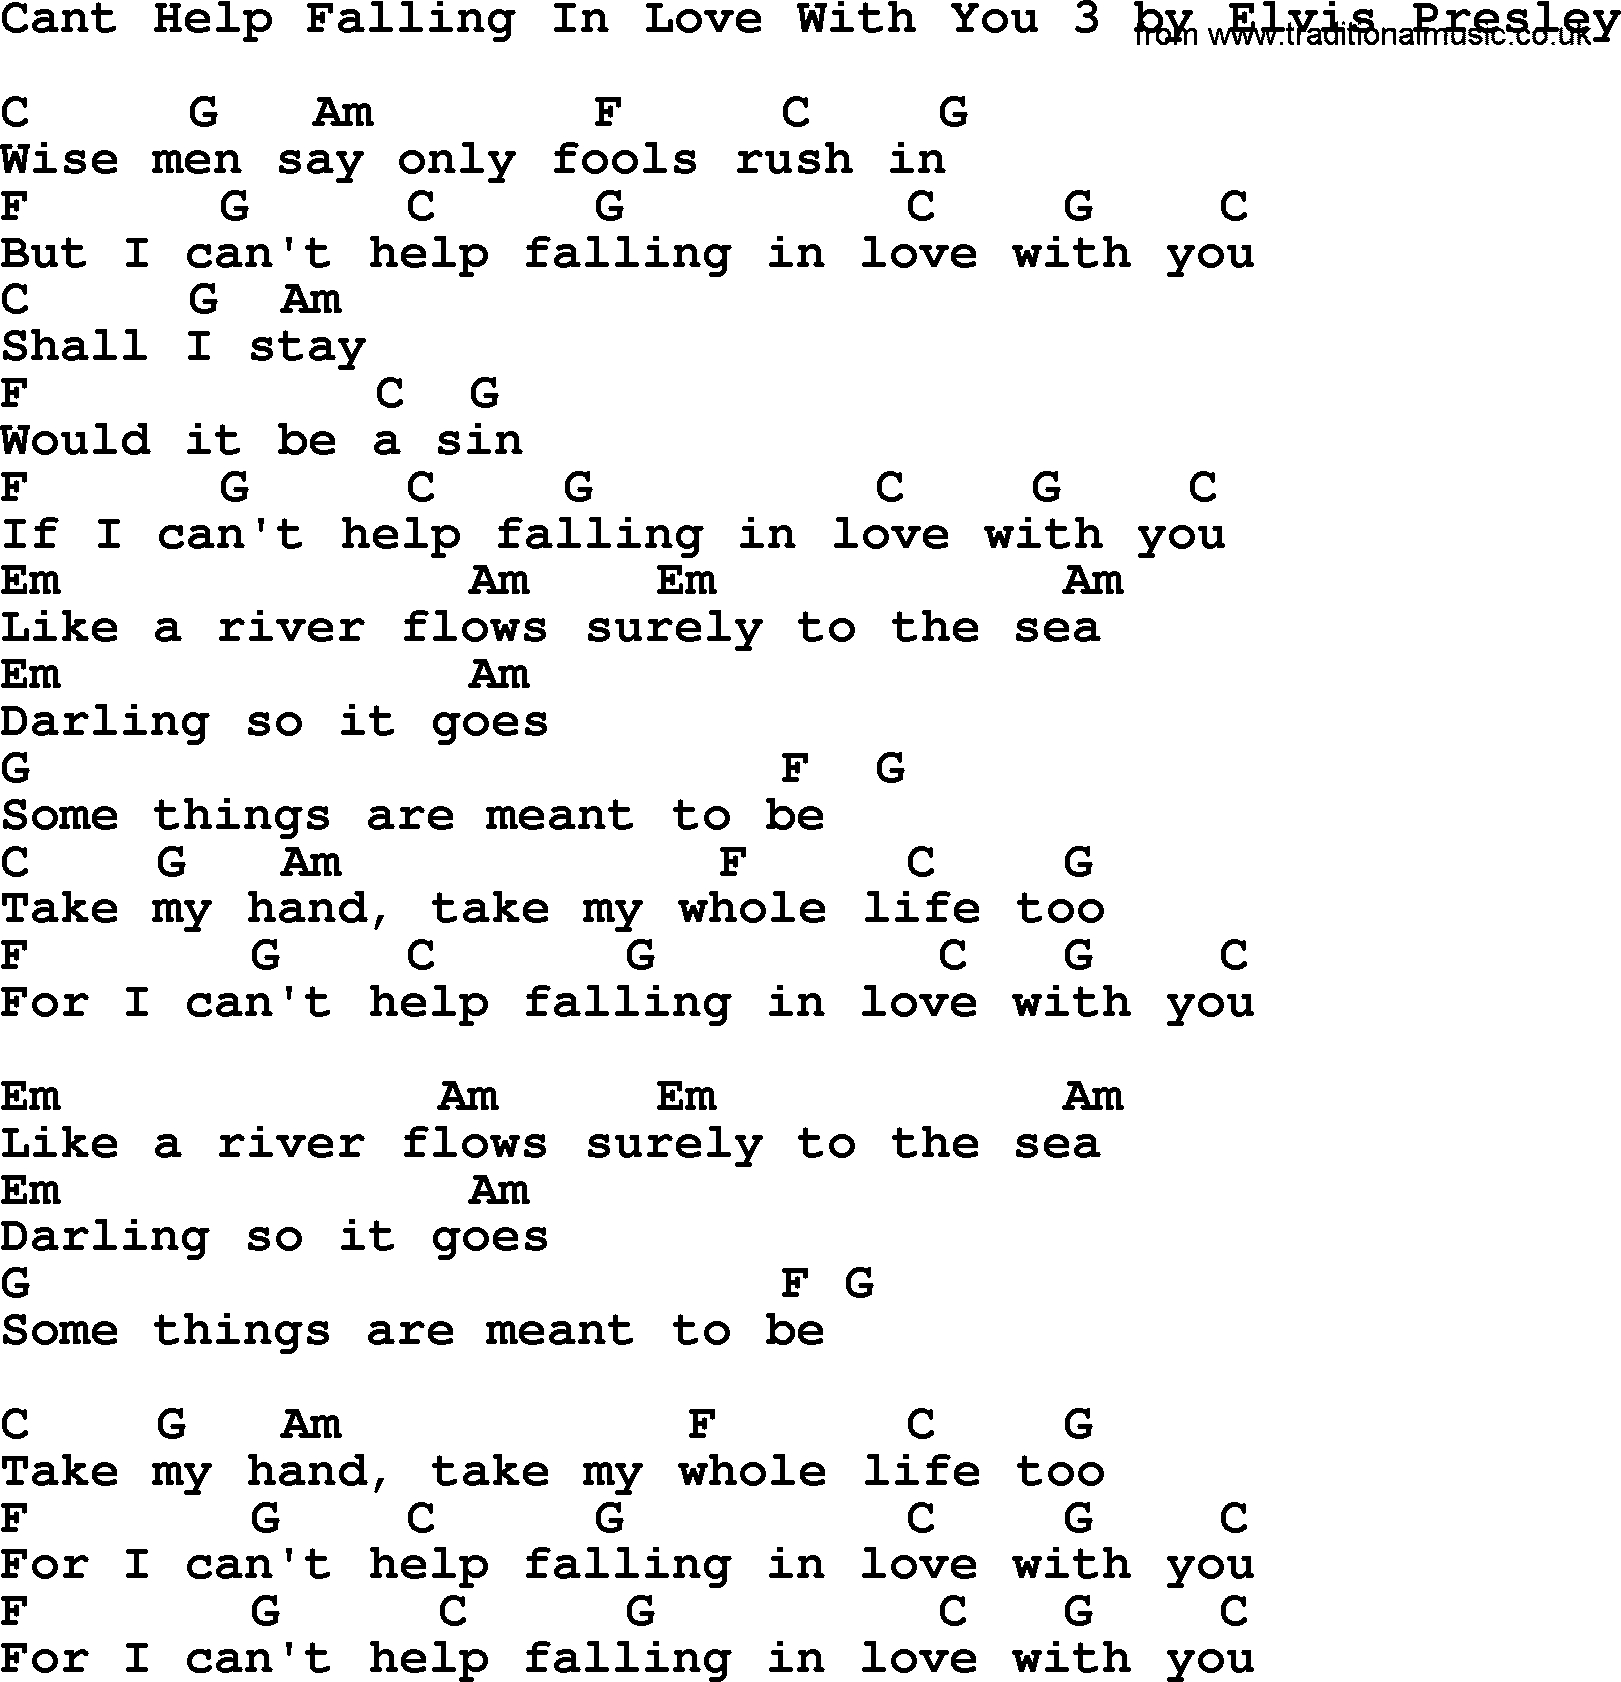 I Can T Help Falling In Love With You Chords Cant Help Falling In Love With You 3 Elvis Presley Lyrics And